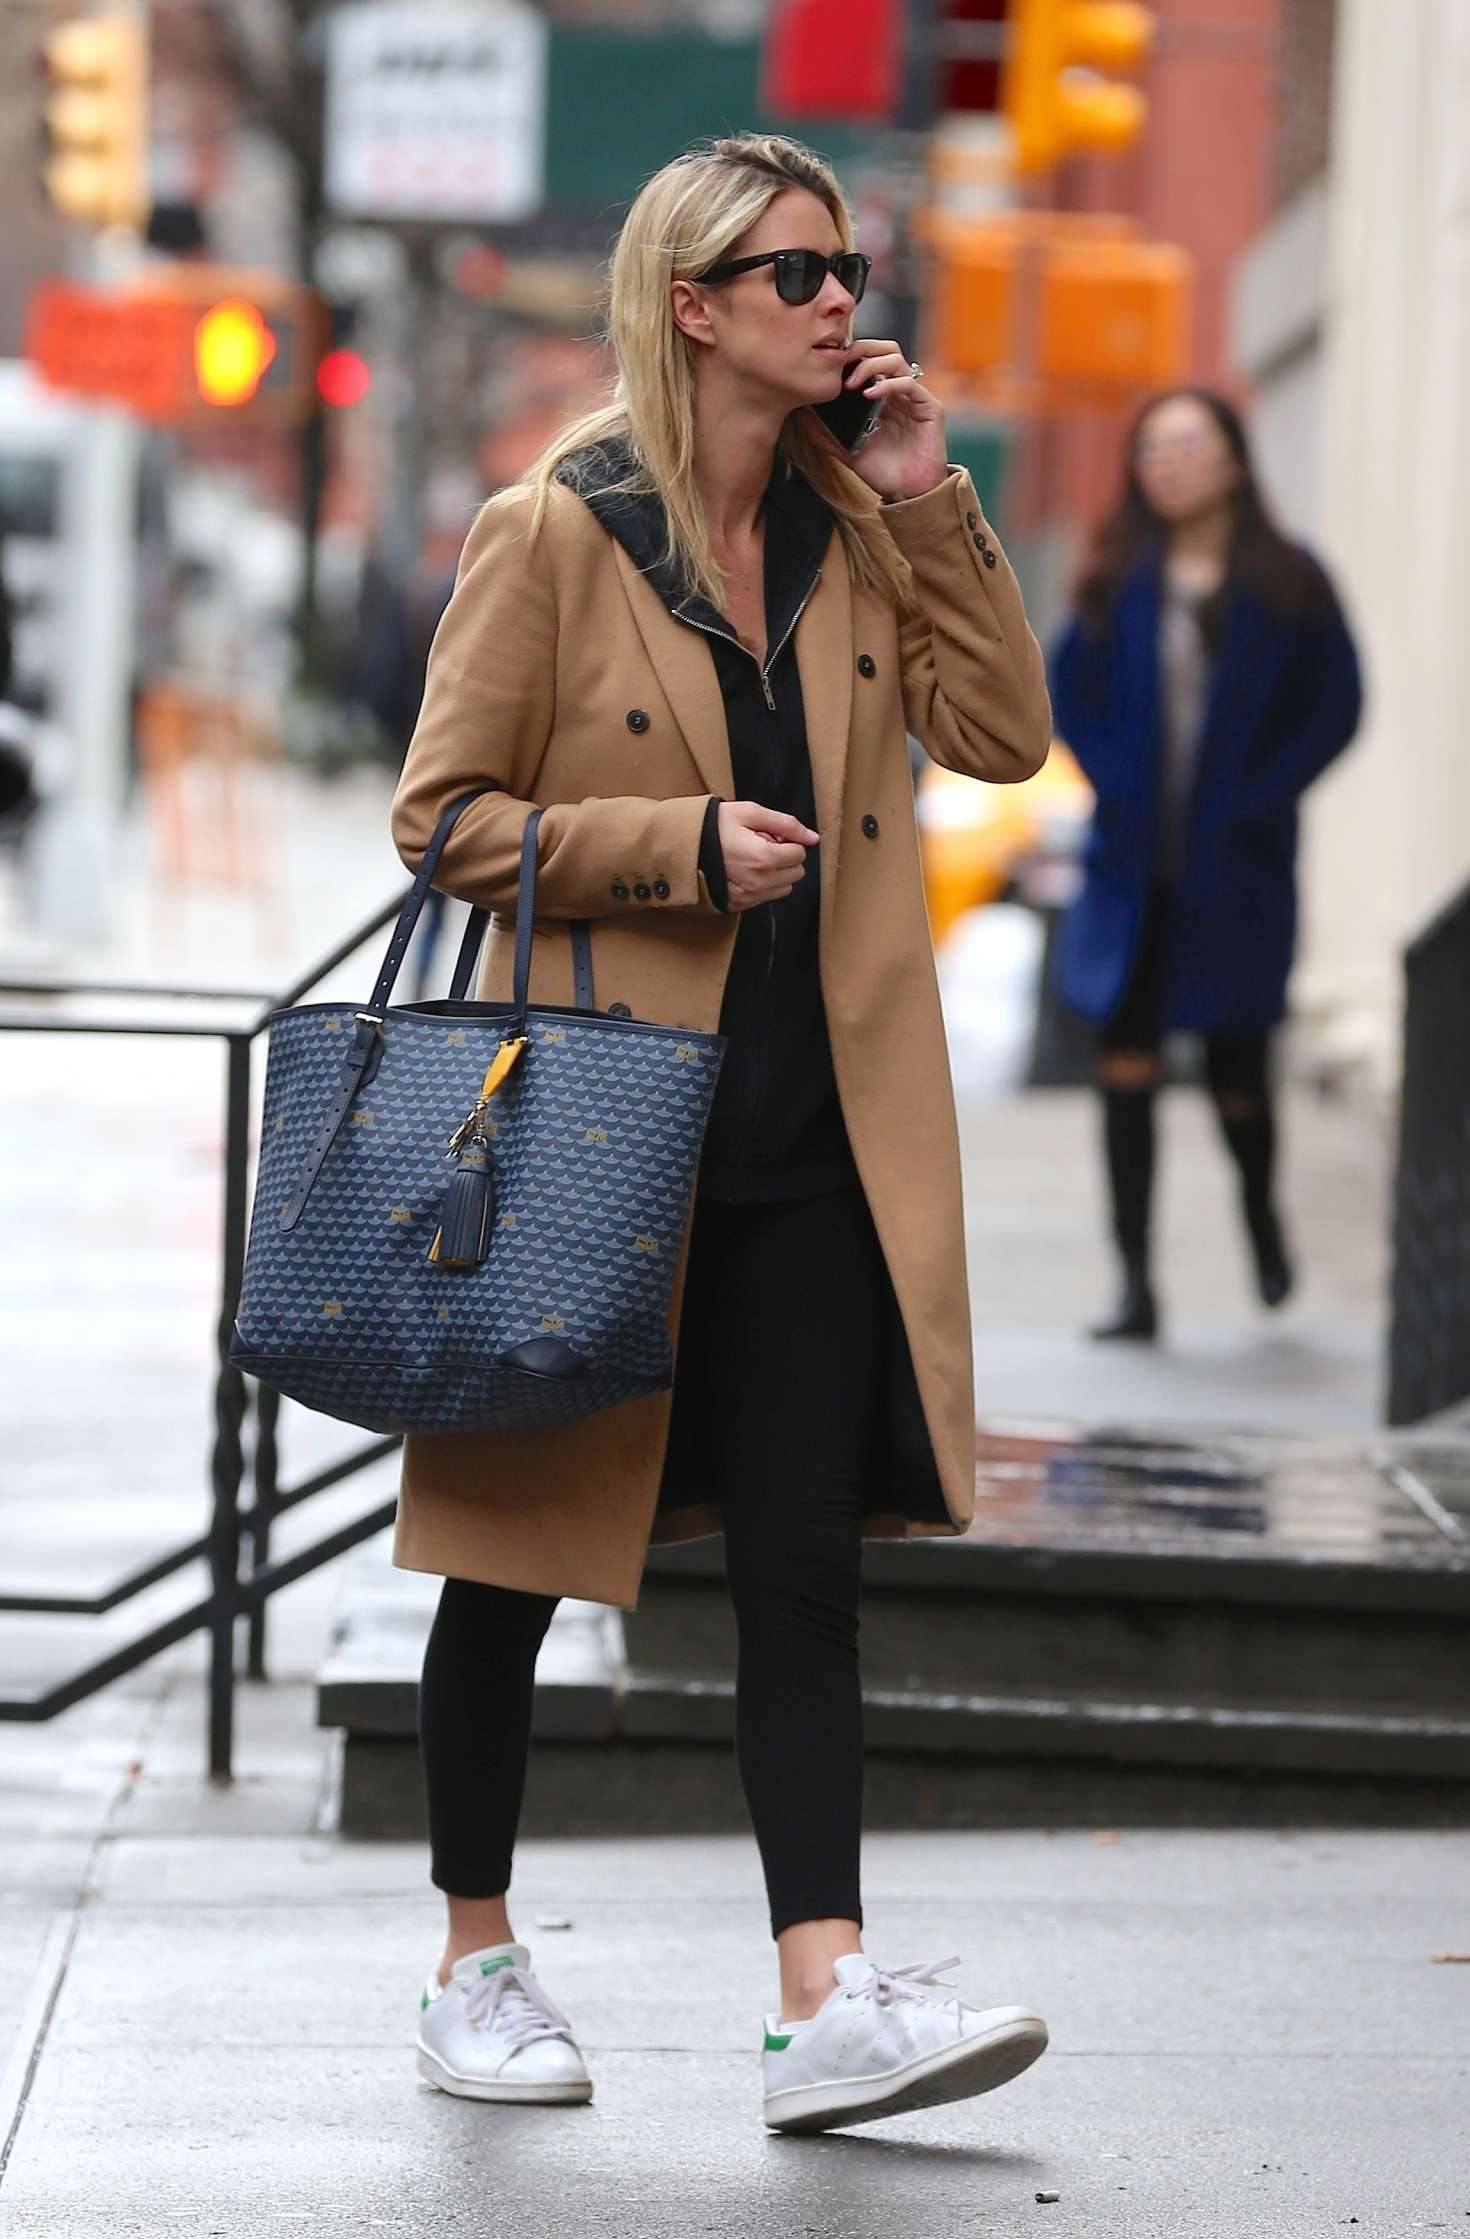 Nicky Hilton 2018 : Nicky Hilton: Chats on her phone in New York City -17